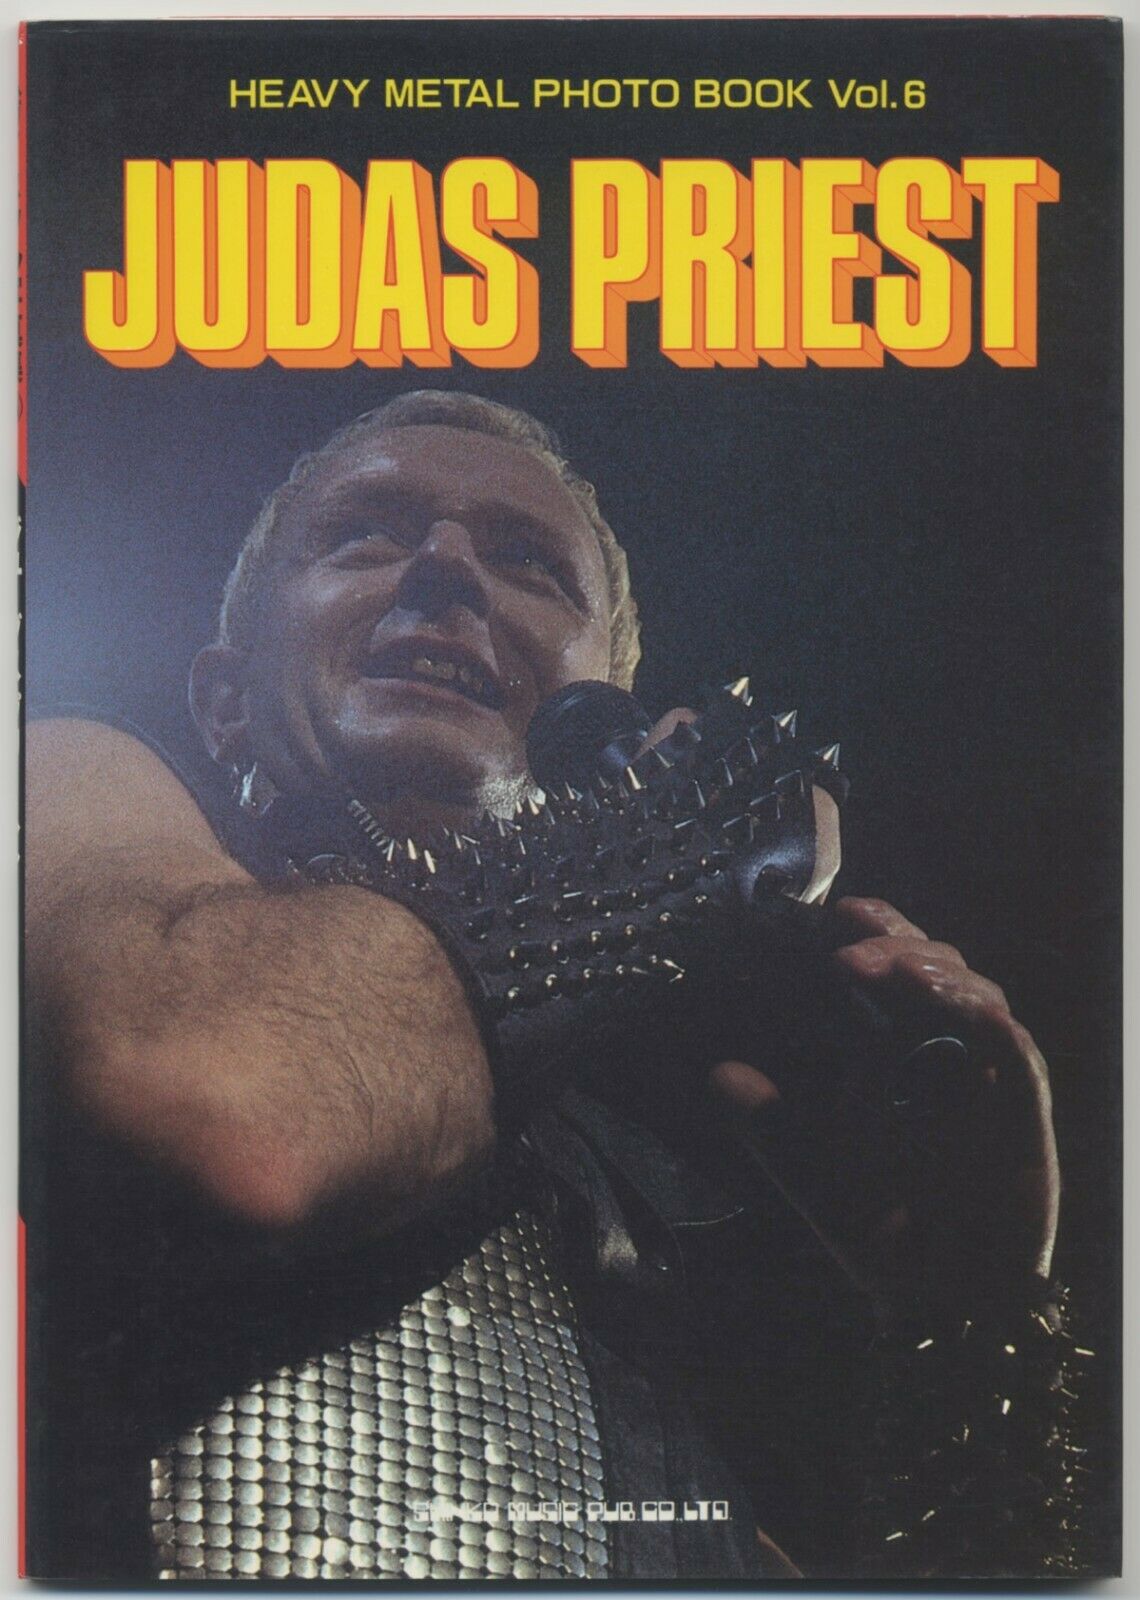 Judas Priest Japan Photo Book Heavy Metal Photo Book Vol. 6, Published In 1984